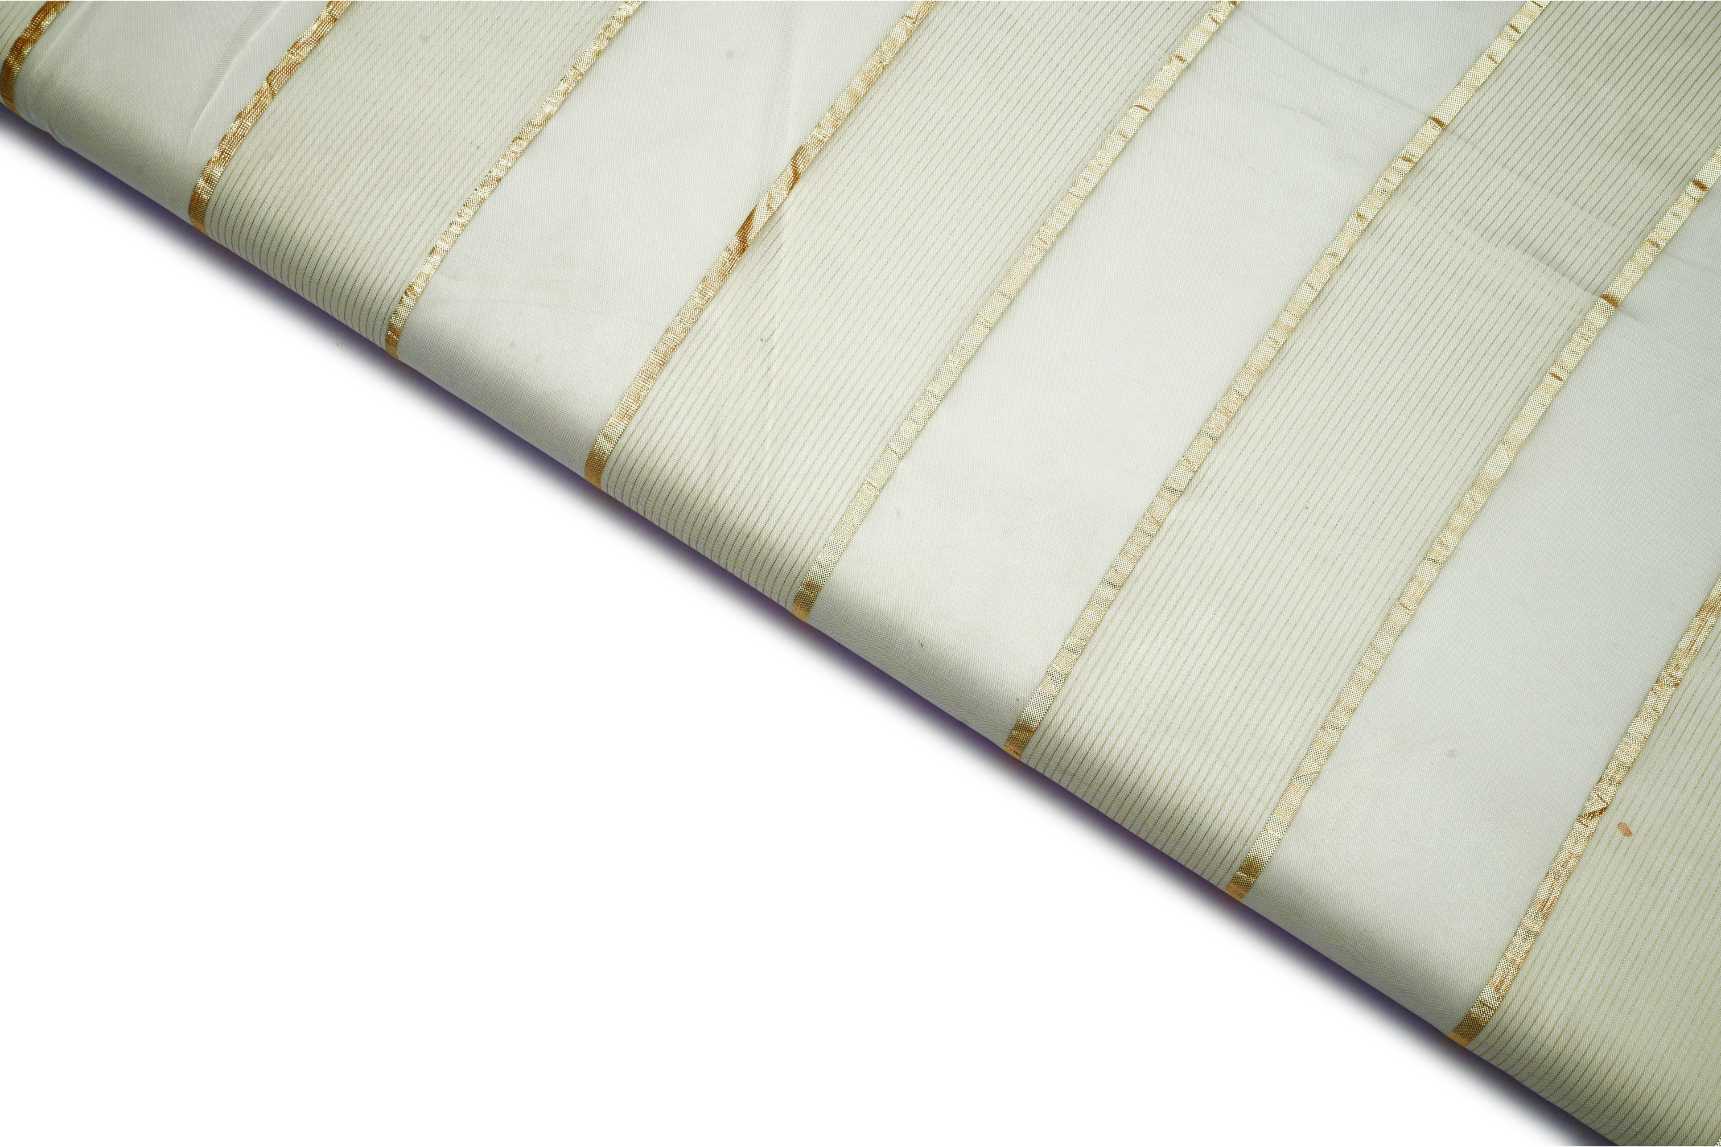 DIABLE OFFWHITE COLOR WISCOSS ORGANZA GOLD THIN LINES BELT PATTERN WEAVE FABRIC 11723